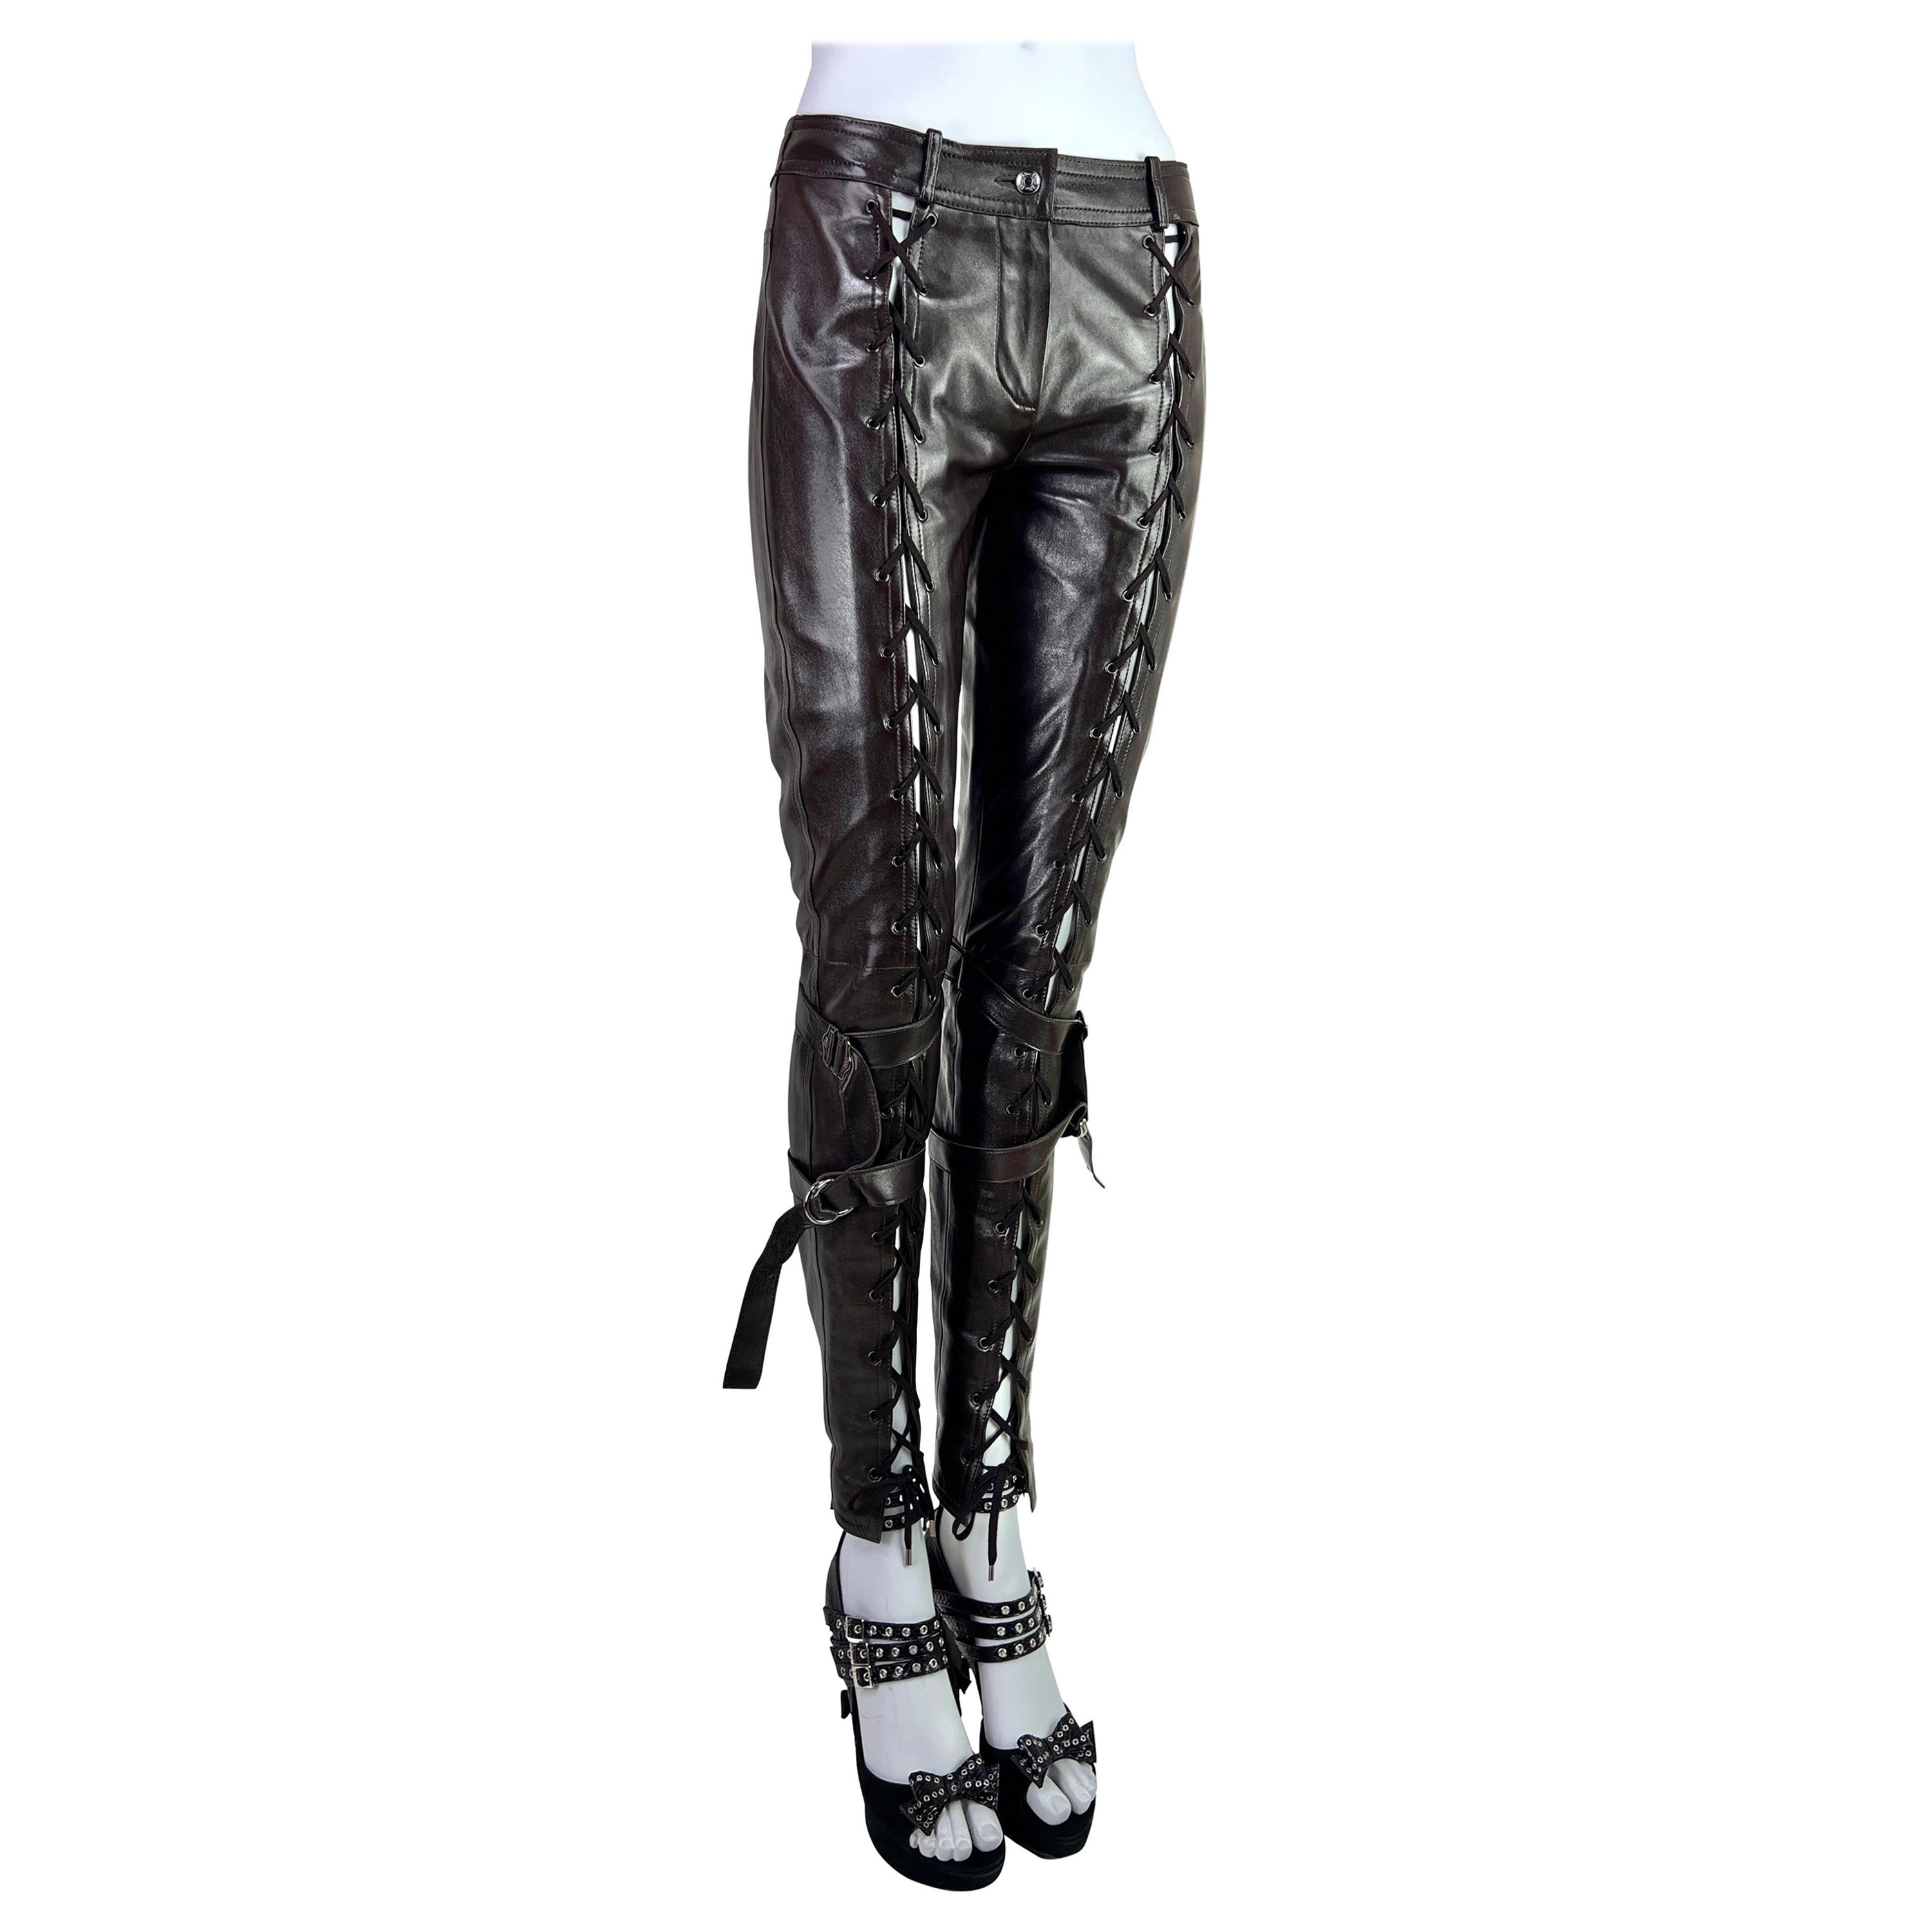 Dior by John Galliano Fall 2003 Leather Lace-Up Pants in Dark Chocolate For Sale